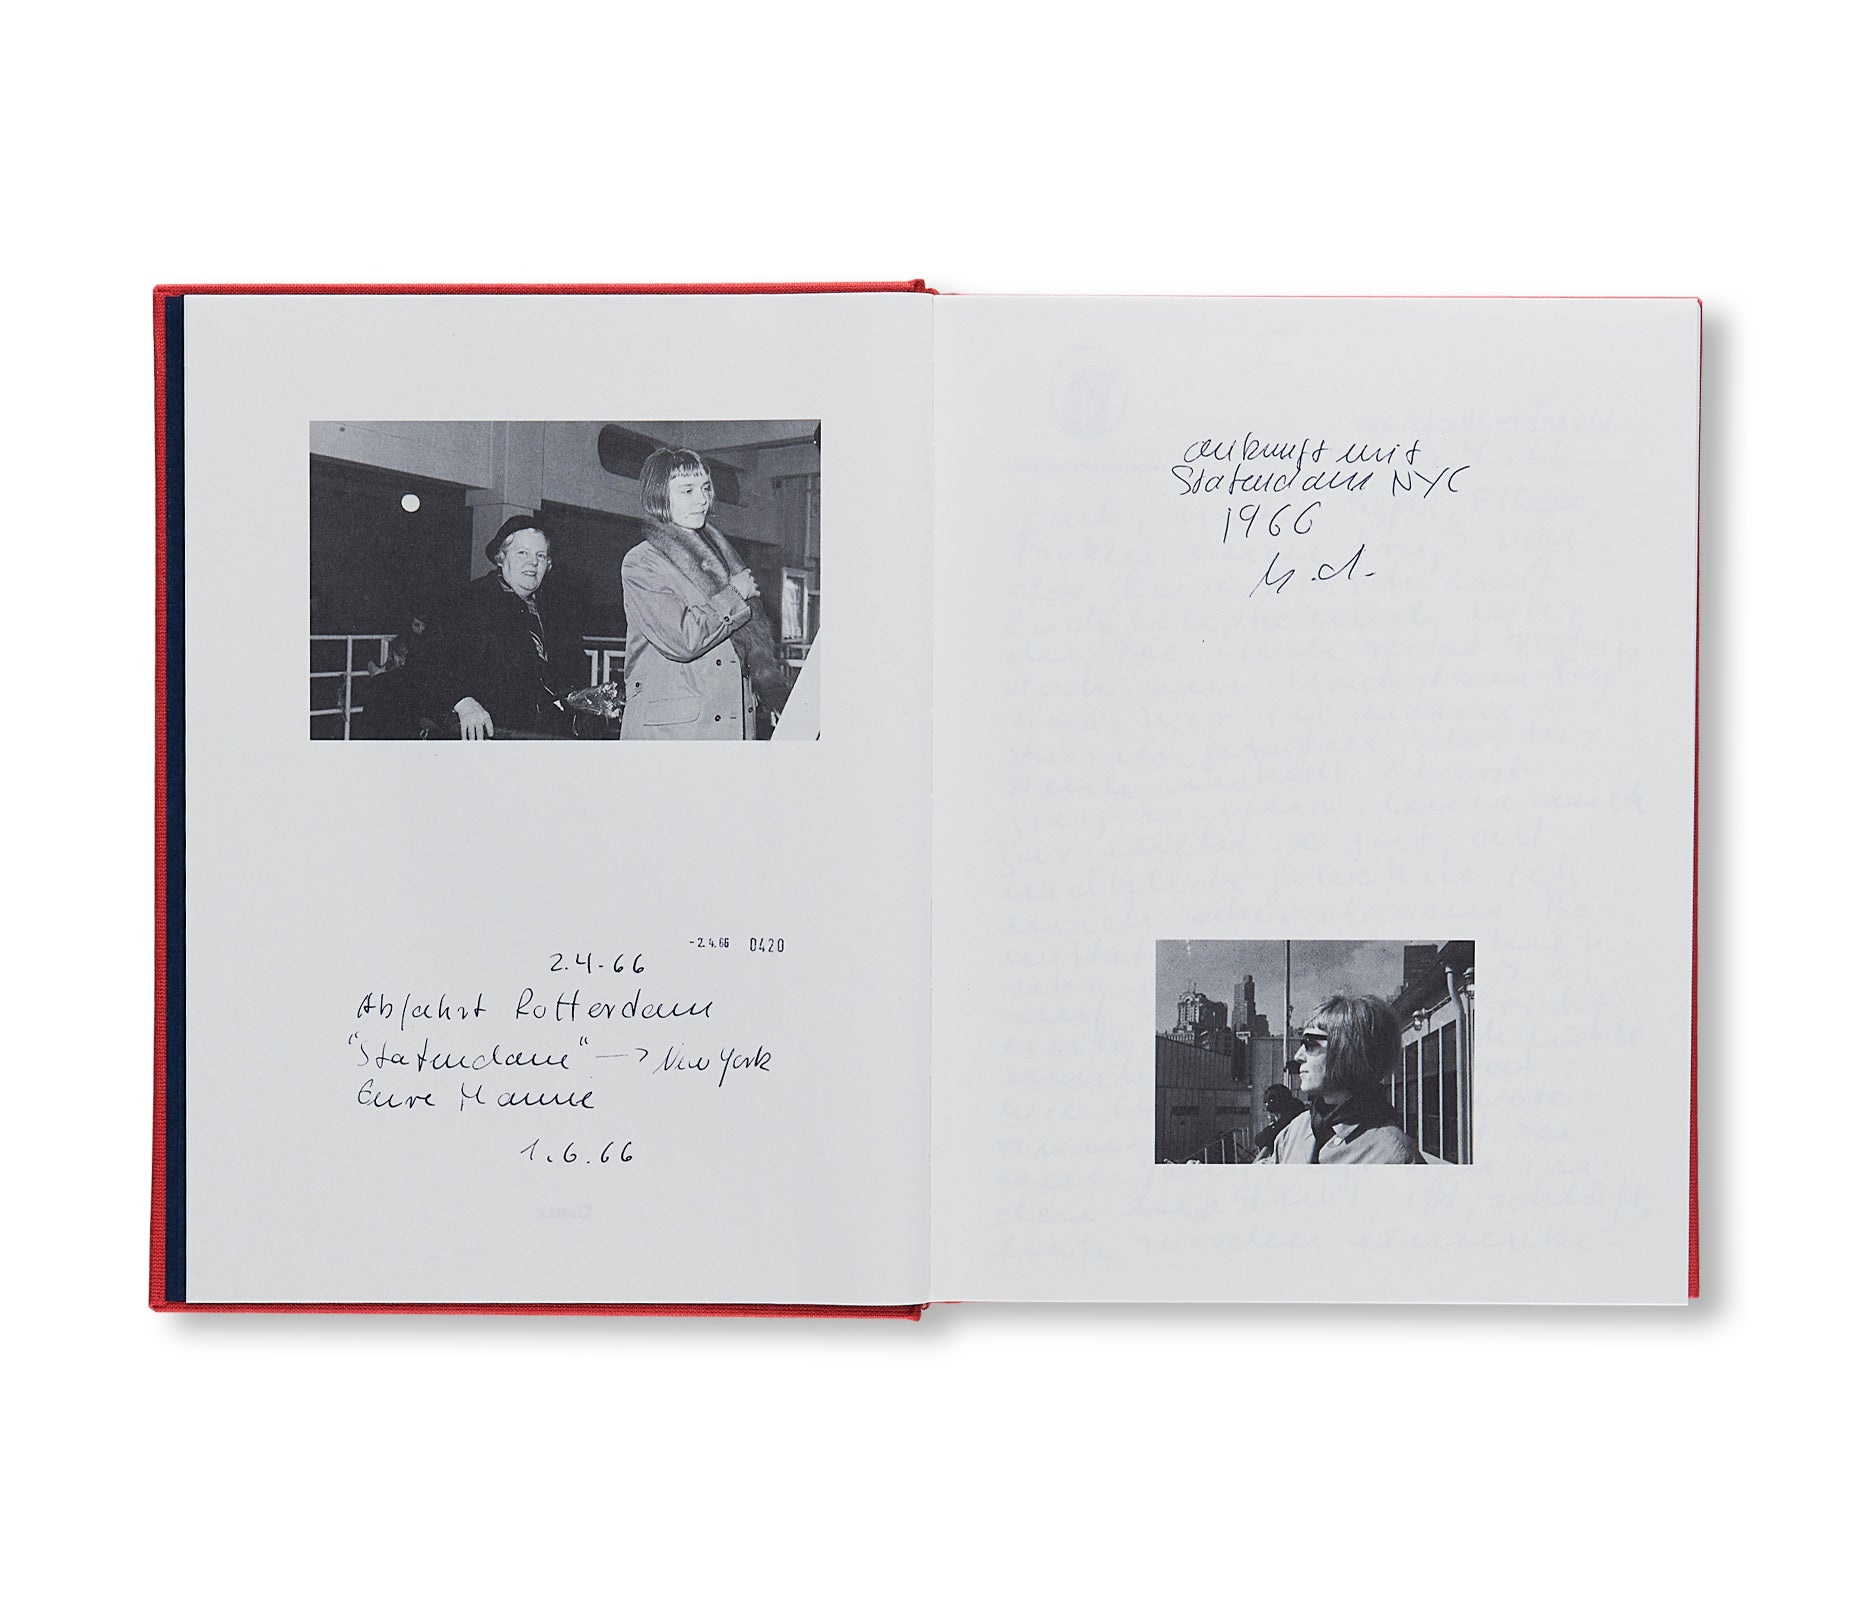 BRIEFE AUS NEW YORK by Hanne Darboven [SIGNED]